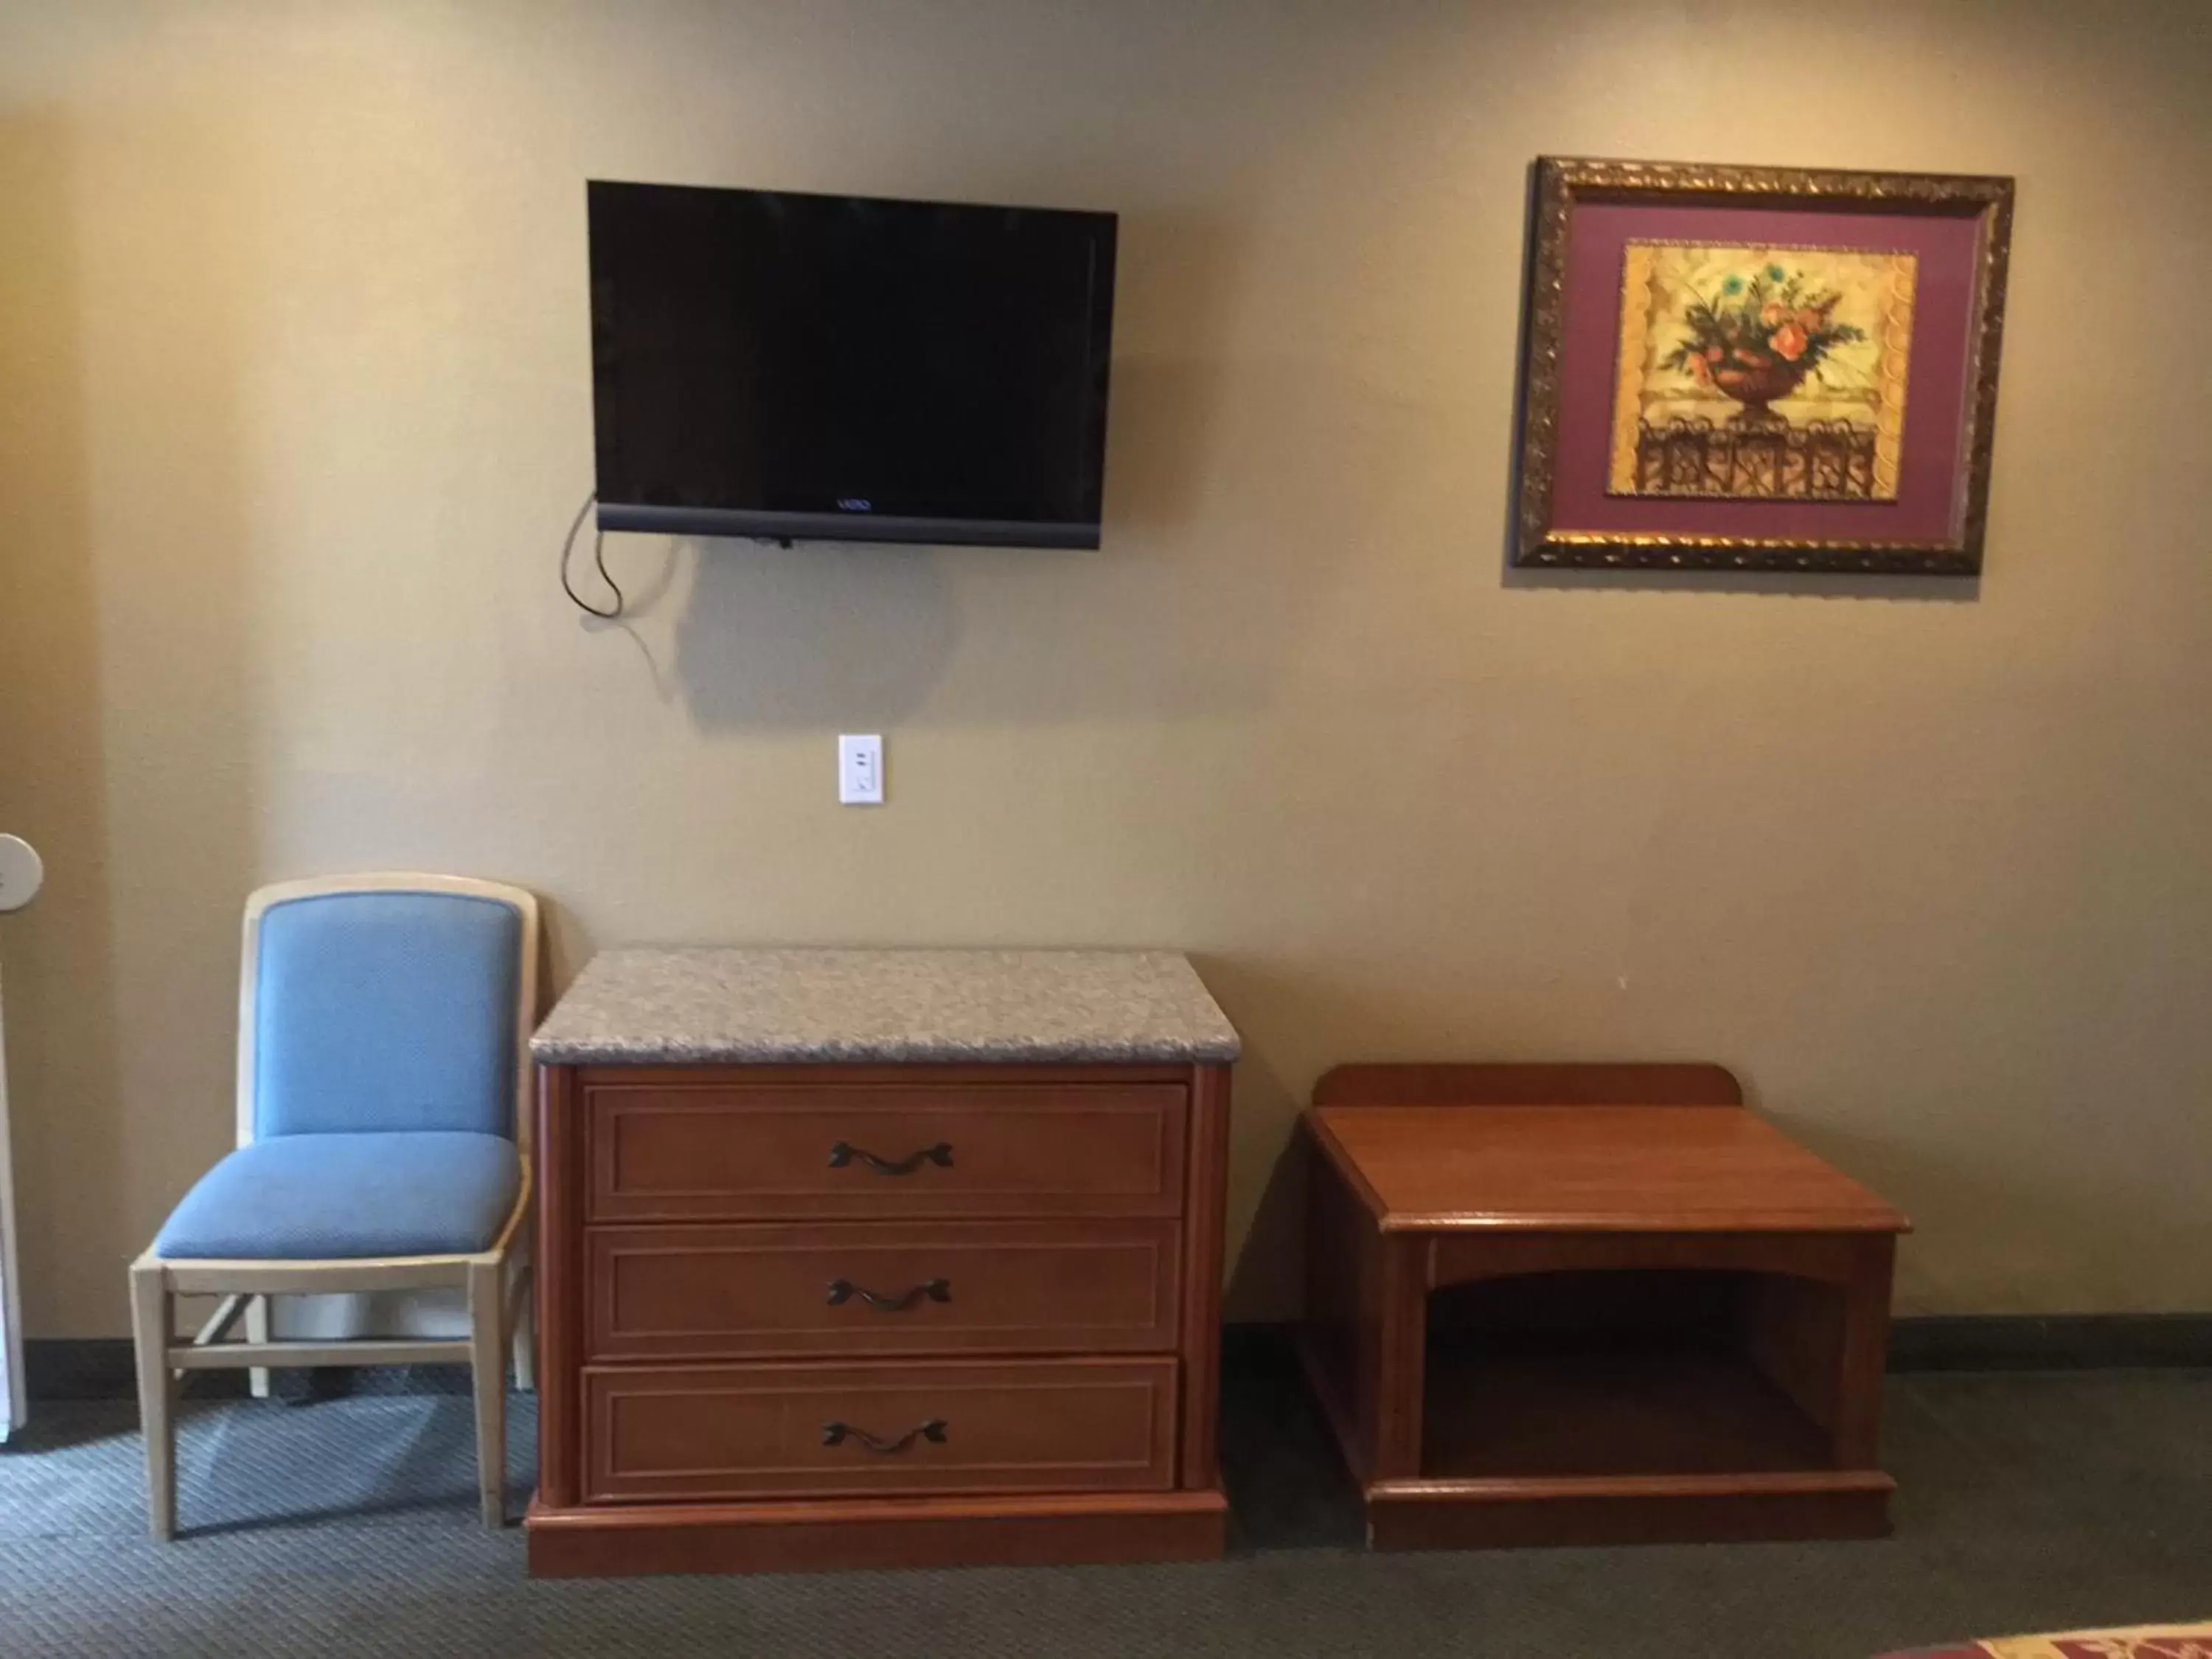 TV and multimedia, TV/Entertainment Center in Bevonshire Lodge Motel